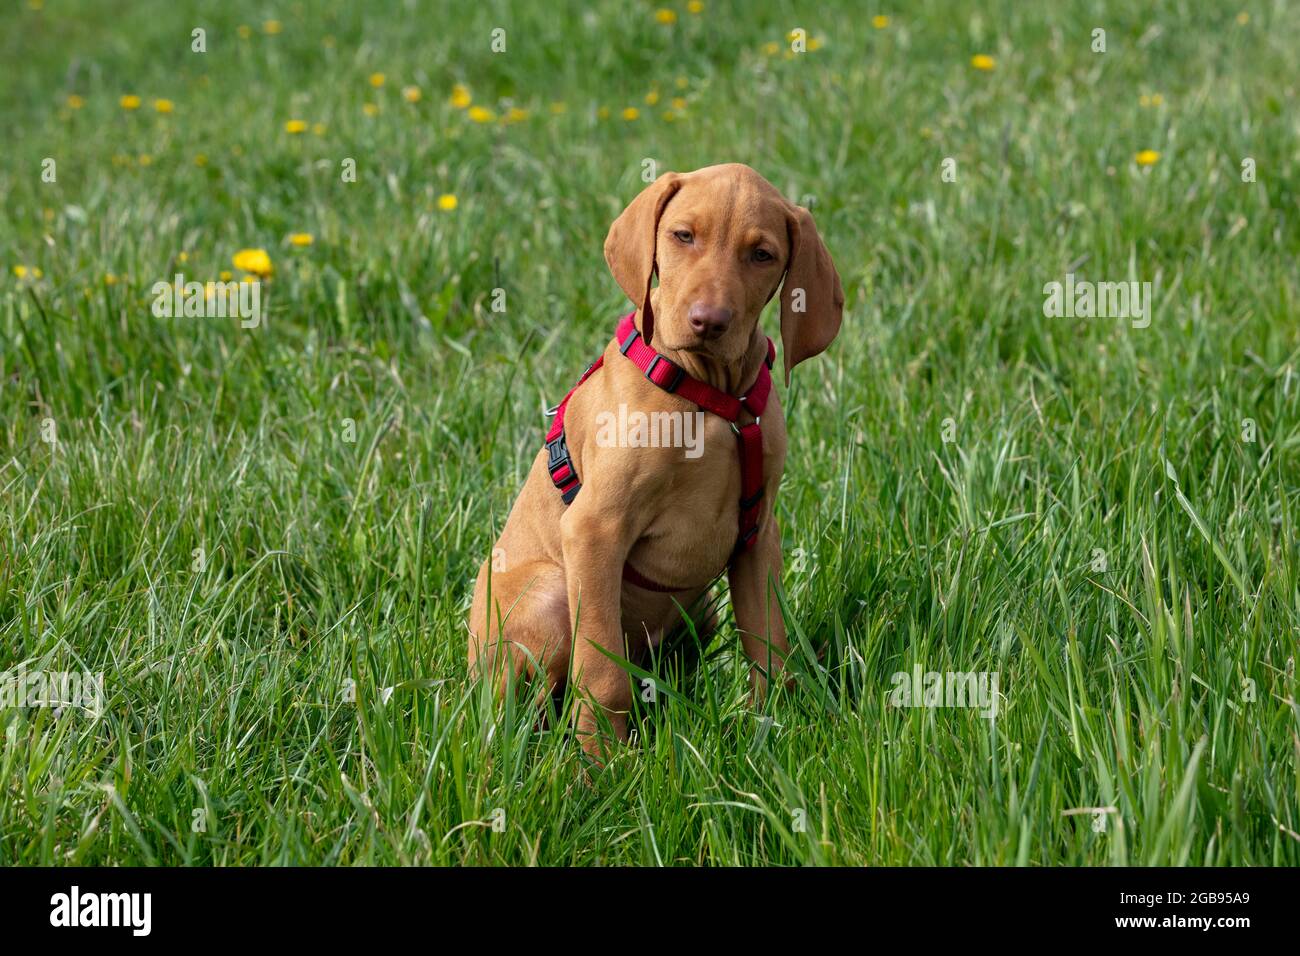 Hungarian or Magyar Vizsla or Smooth-Haired Vizsla, Pointing Dog, puppy sitting in a field in spring, 11 weeks old Stock Photo